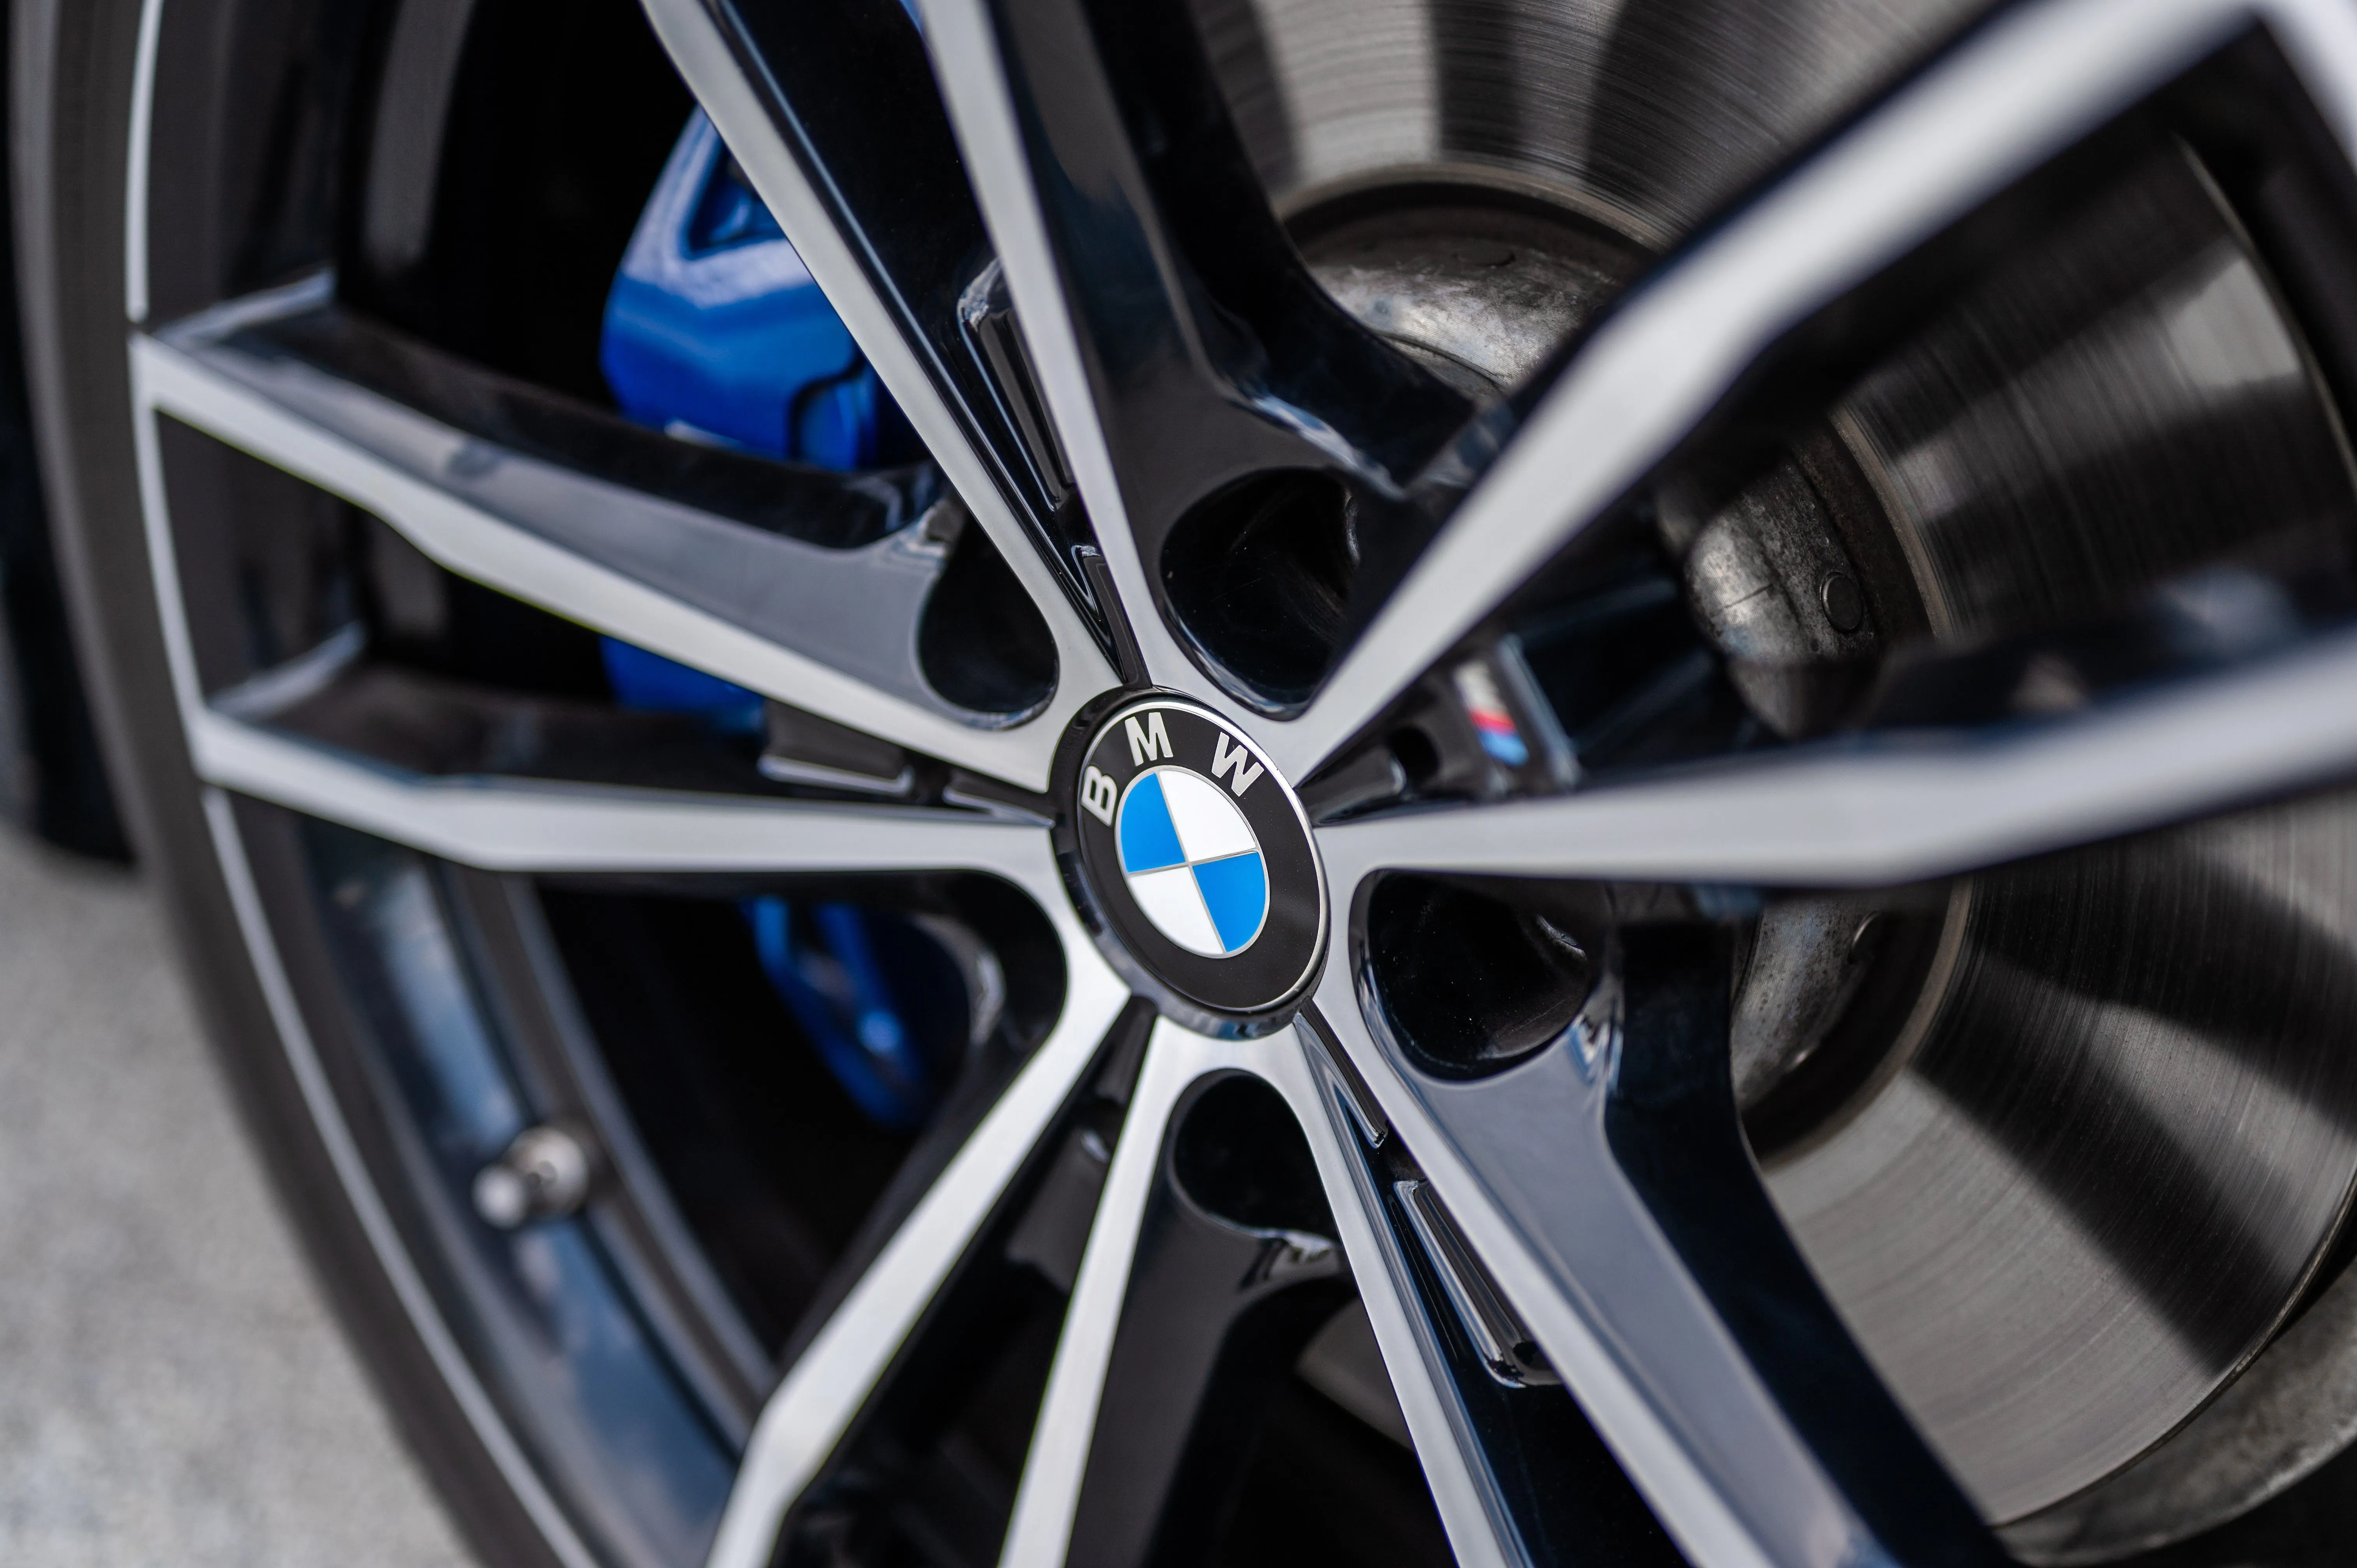 Close-up of a BMW alloy wheel with logo and blue brake caliper.